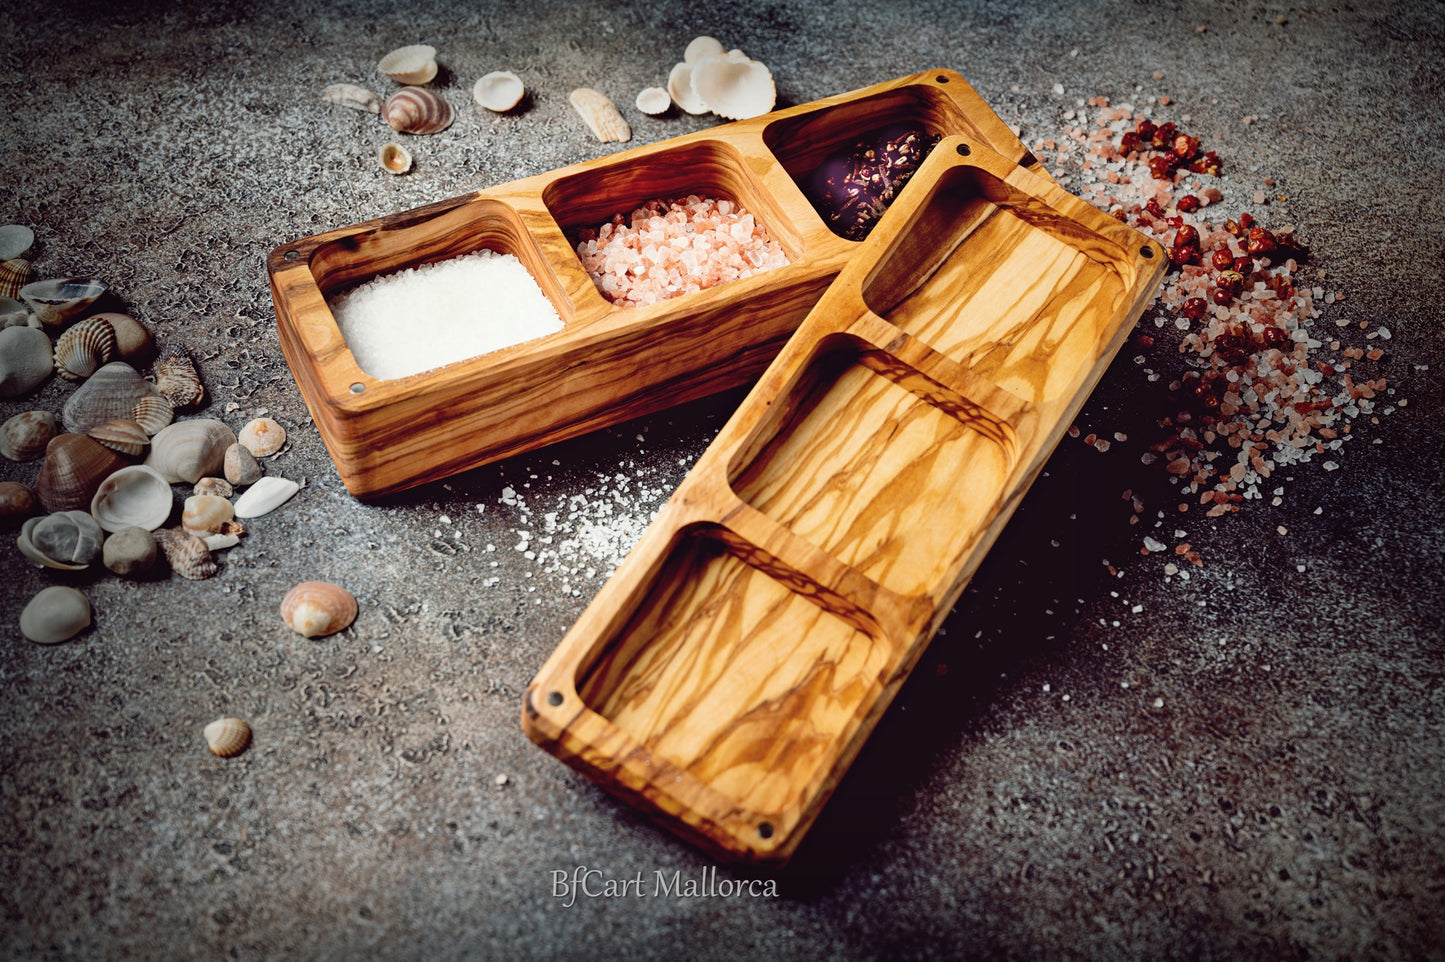 Large salt shaker with a useful lid and 3 compartments of olive wood for all kinds of salt, spices and all kinds of condiments, salt cellar